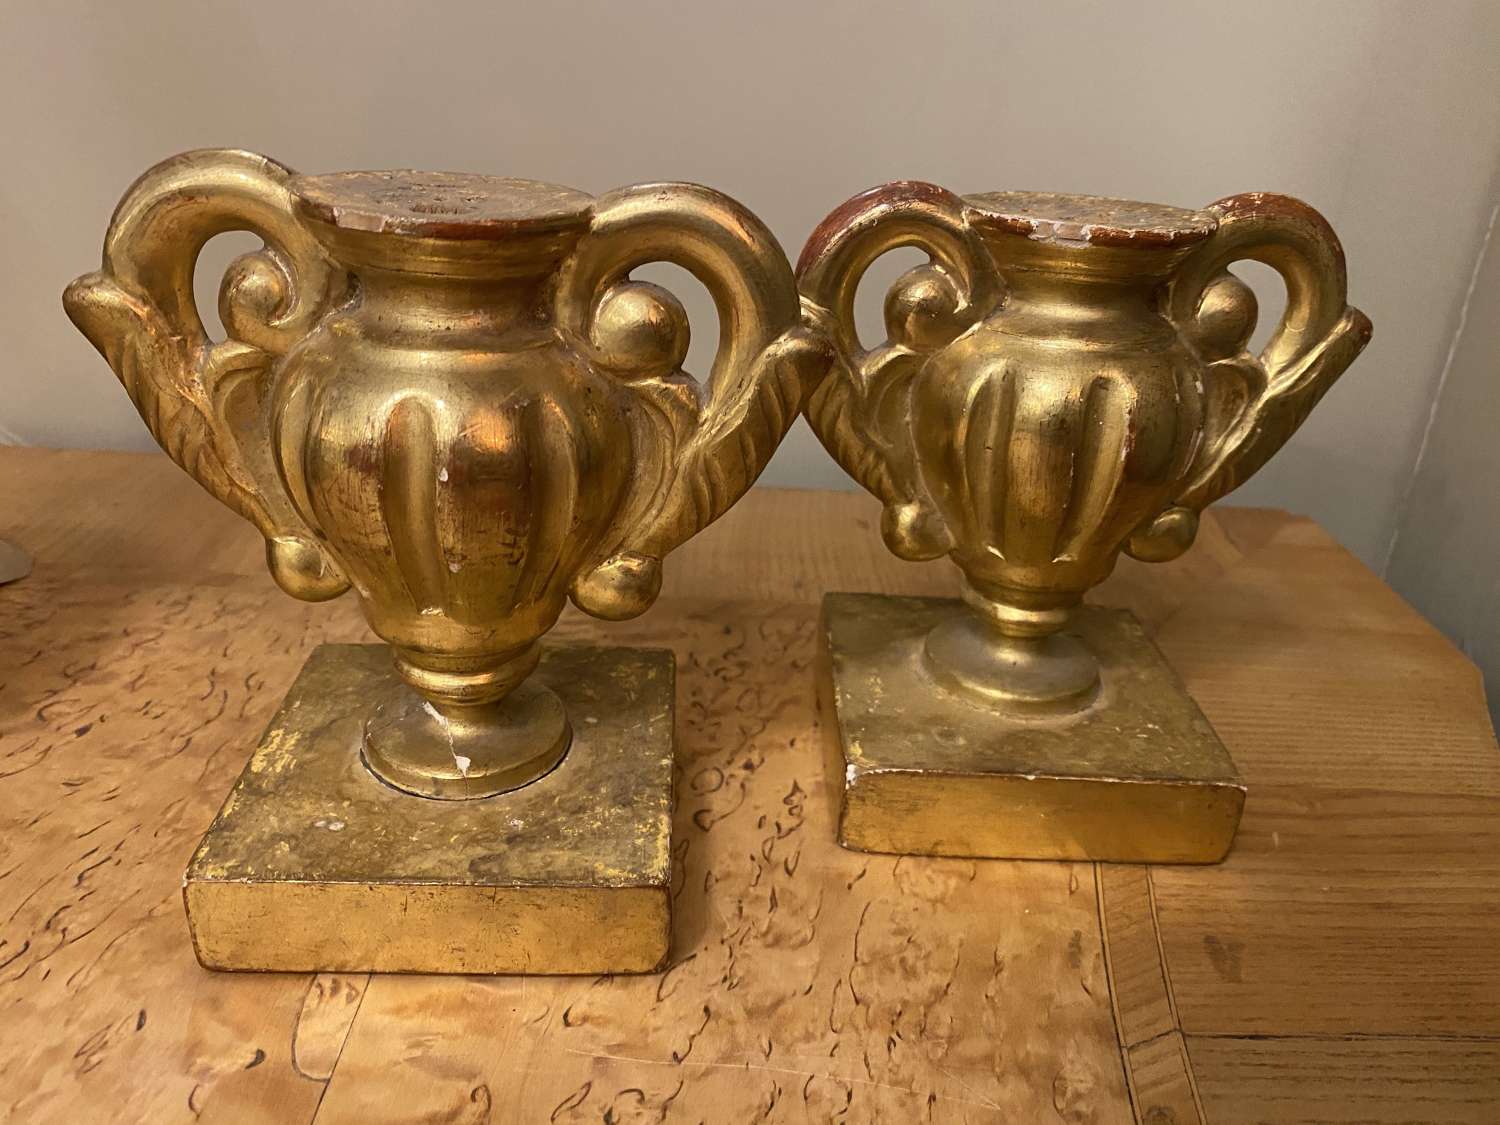 C1800 A Pair of Gilt Gesso Urn Fragments